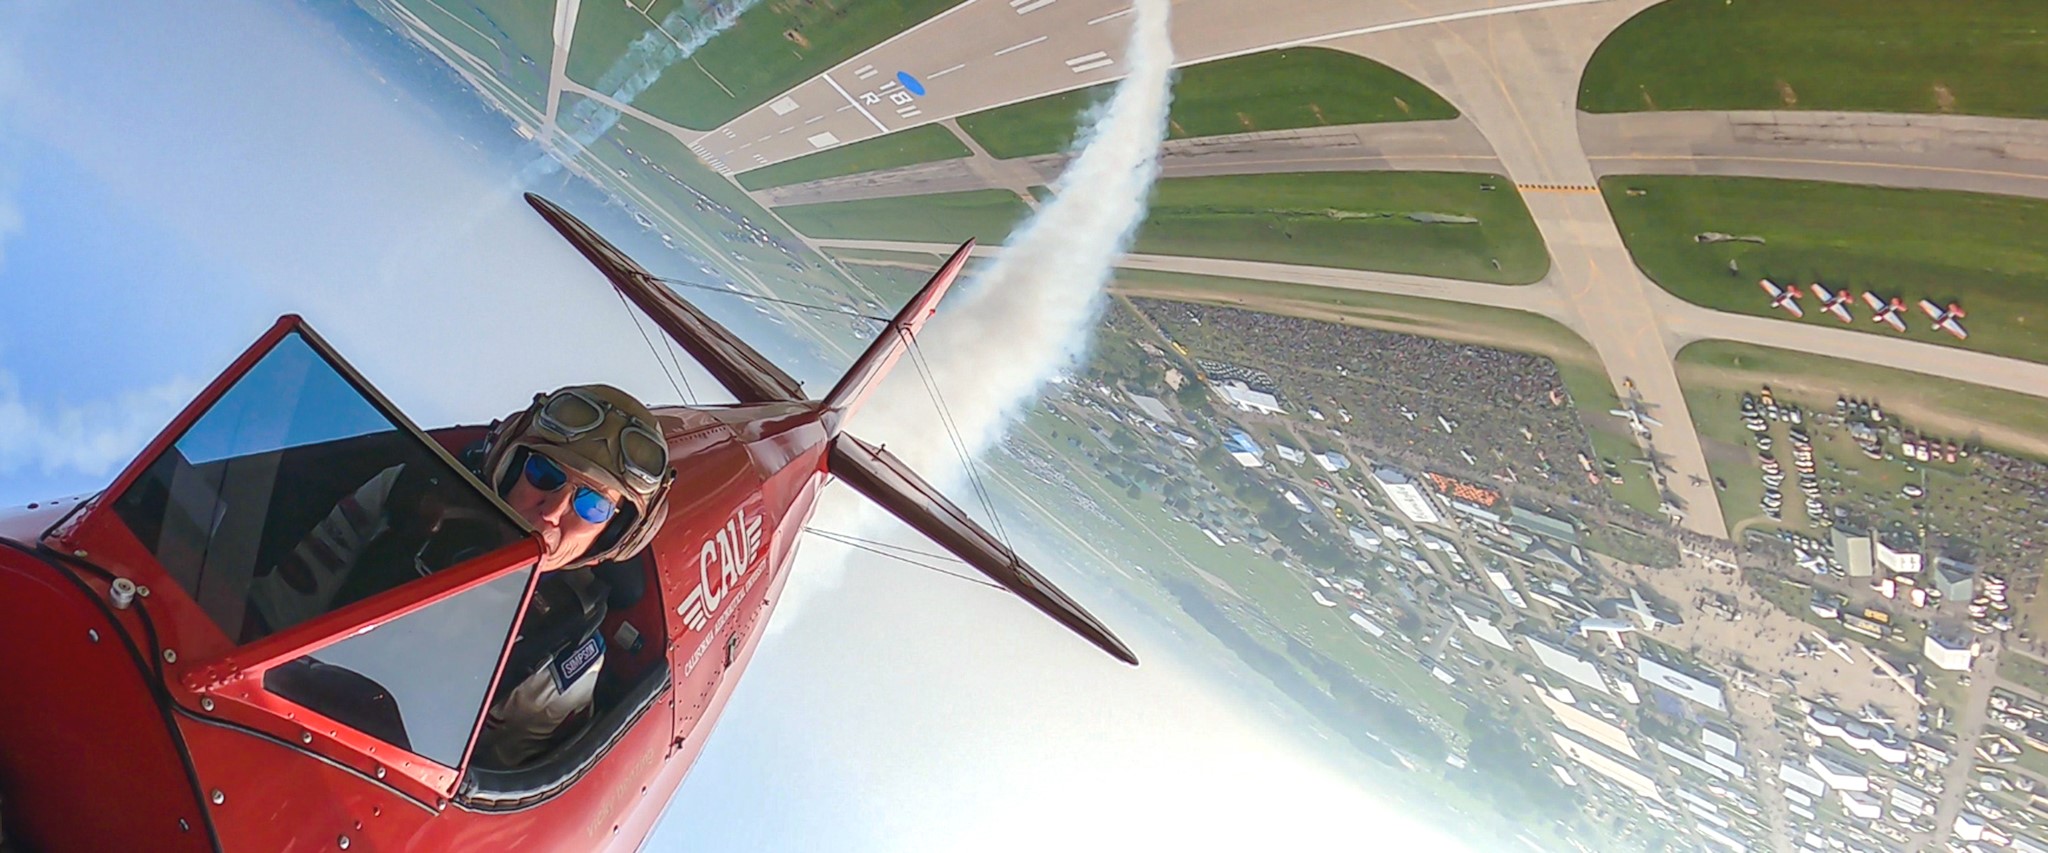 Vicky Benzing Joins “WomenVenture” Lineup at EAA AirVenture - CAU